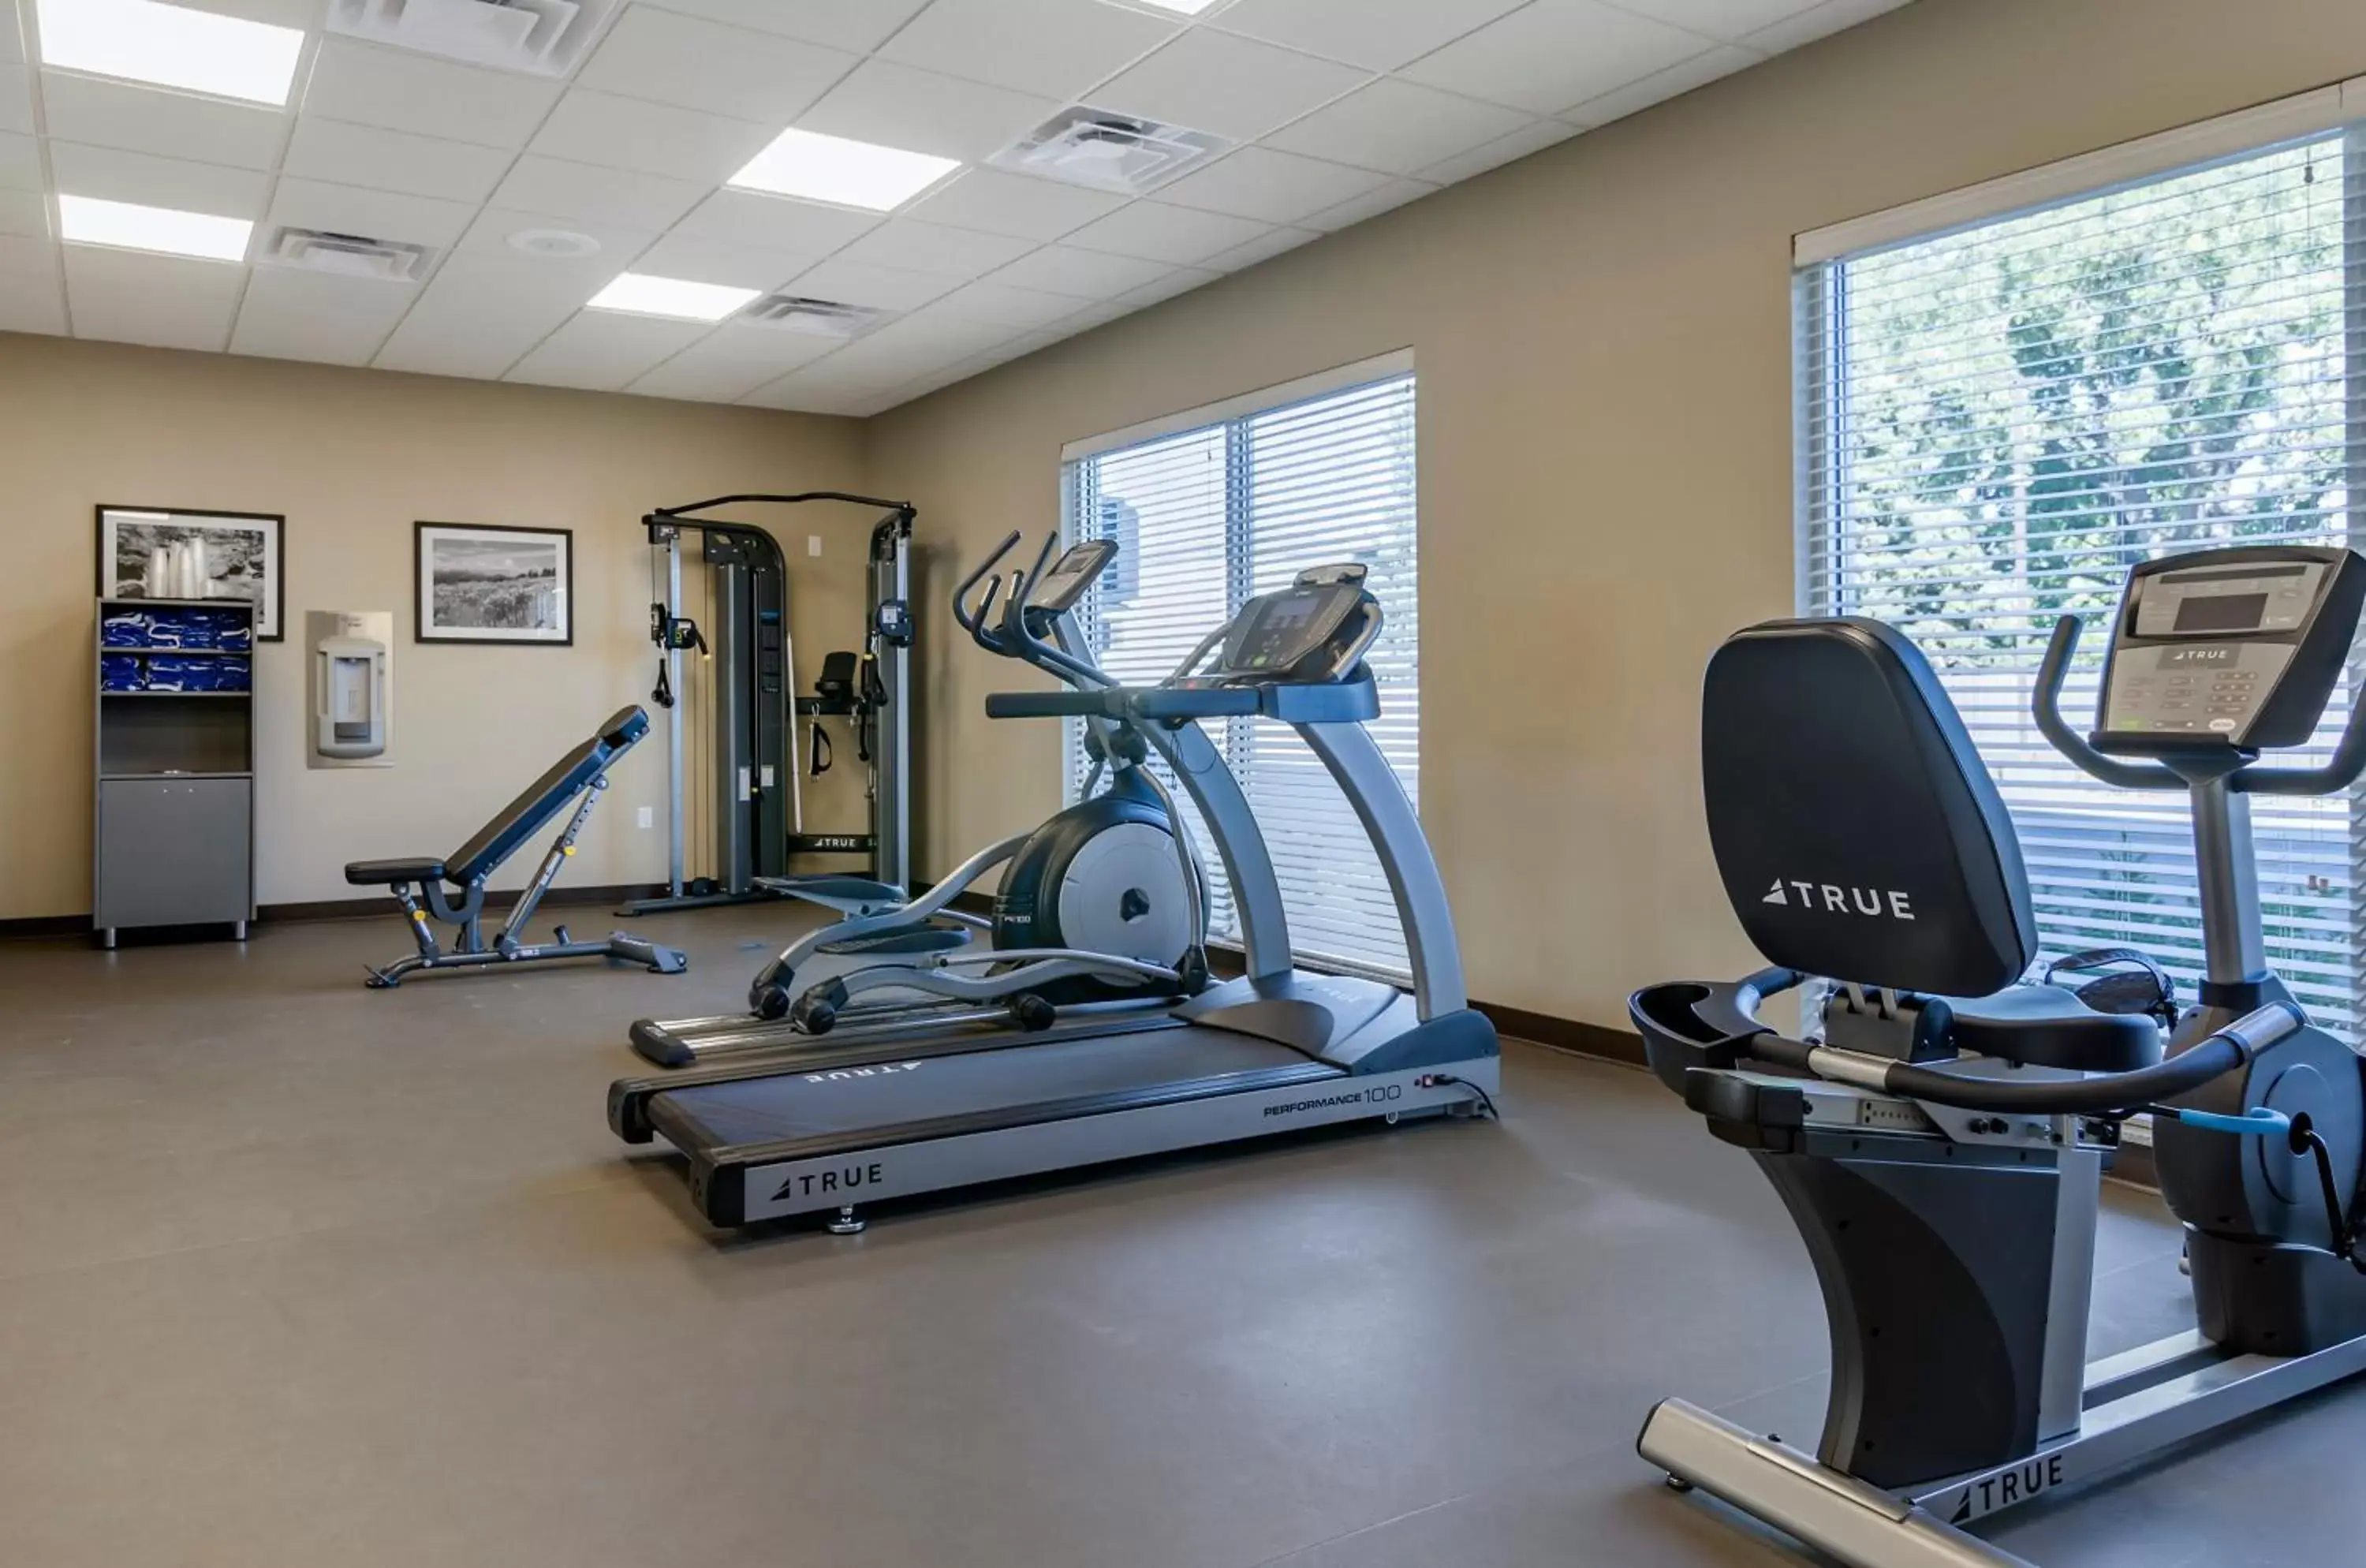 Fitness centre/facilities, Fitness Center/Facilities in MainStay Suites Great Falls Airport